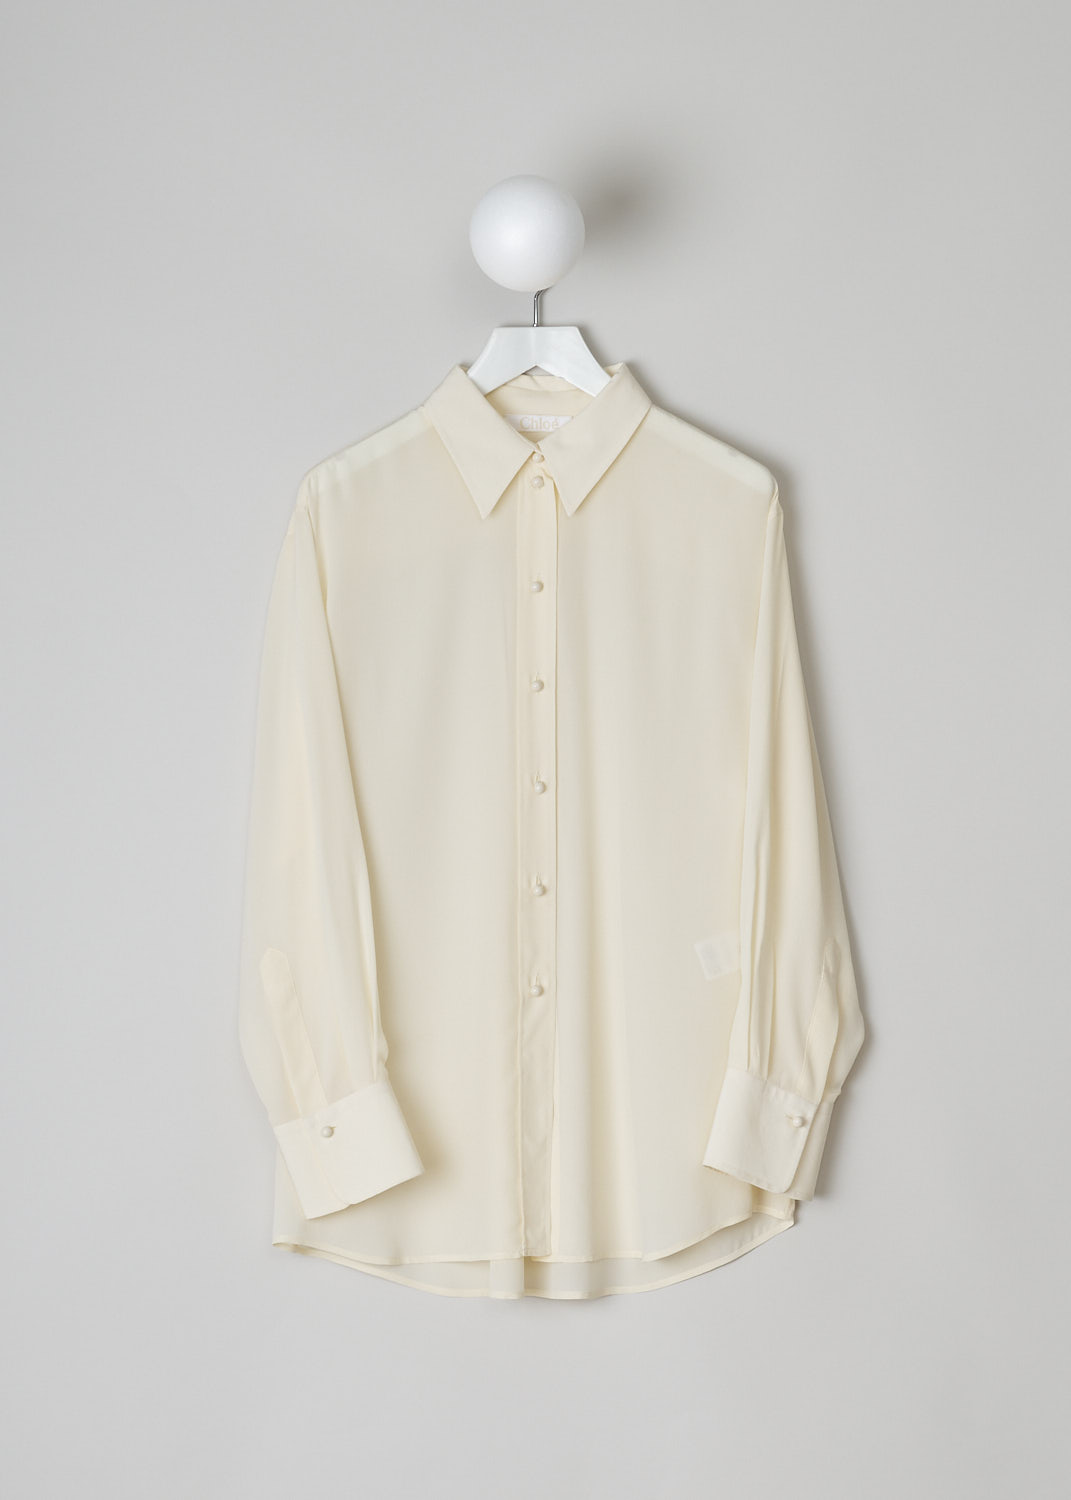 CHLOÉ, PRISTINE WHITE SILK BLOUSE, CHC22UHT05004114, White, Front, This silk Pristine White blouse has a classic collar and a button placket with round ceramic. The blouse has long sleeves with buttoned cuffs.  A centre box pleat runs vertically down the back.
